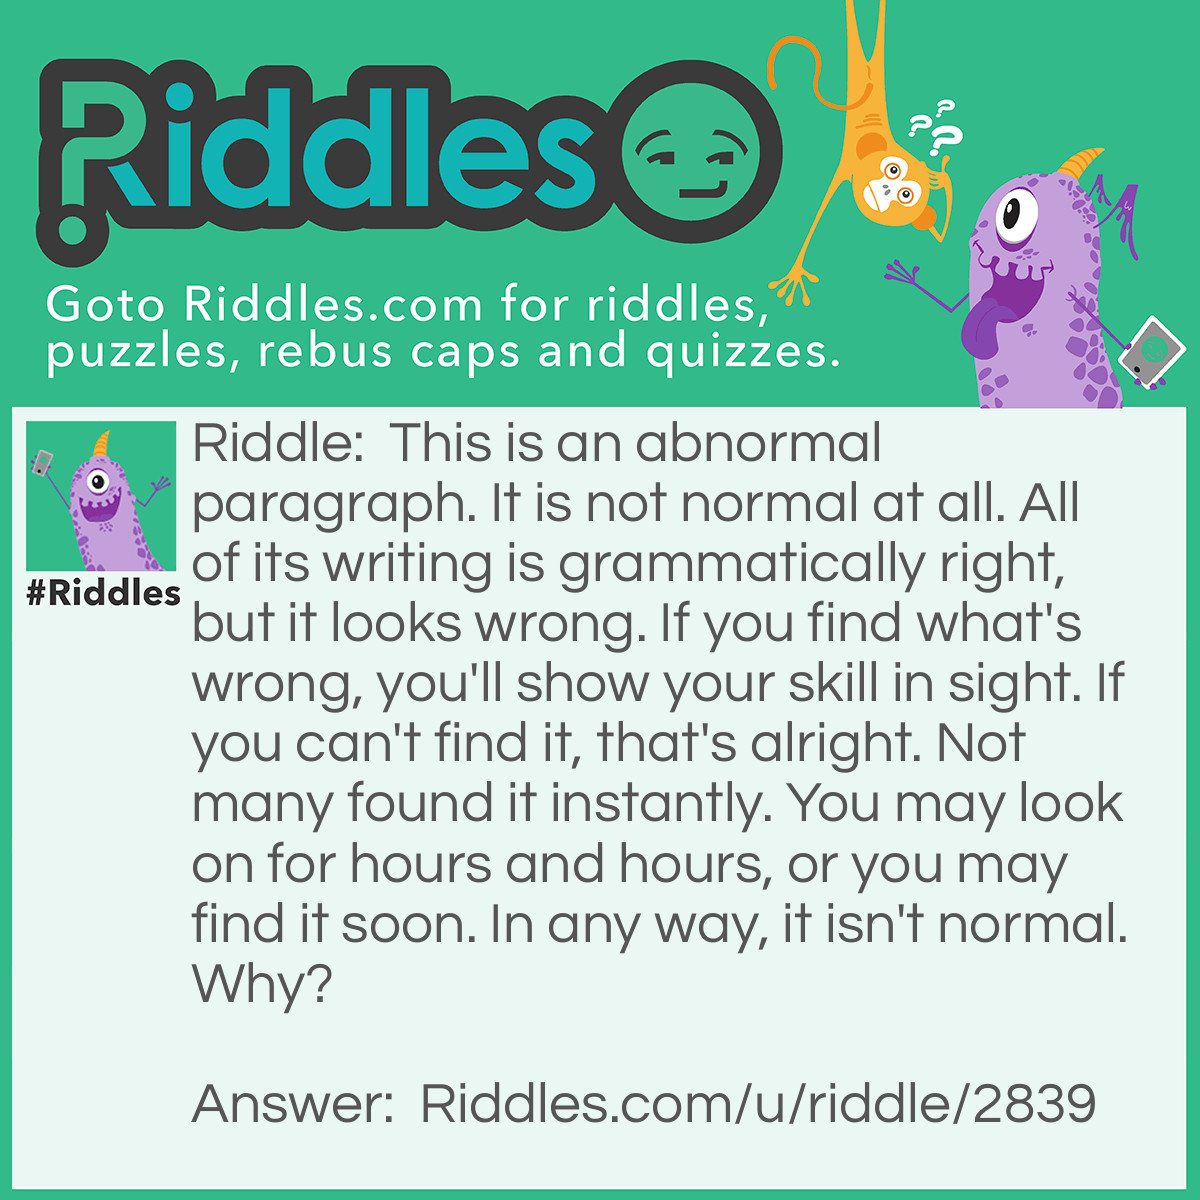 Riddle: This is an abnormal paragraph. It is not normal at all. All of its writing is grammatically right, but it looks wrong. If you find what's wrong, you'll show your skill in sight. If you can't find it, that's alright. Not many found it instantly. You may look on for hours and hours, or you may find it soon. In any way, it isn't normal. Why? Answer: This paragraph contains no words with "e" in it. This is abnormal as "e" is found most commonly.